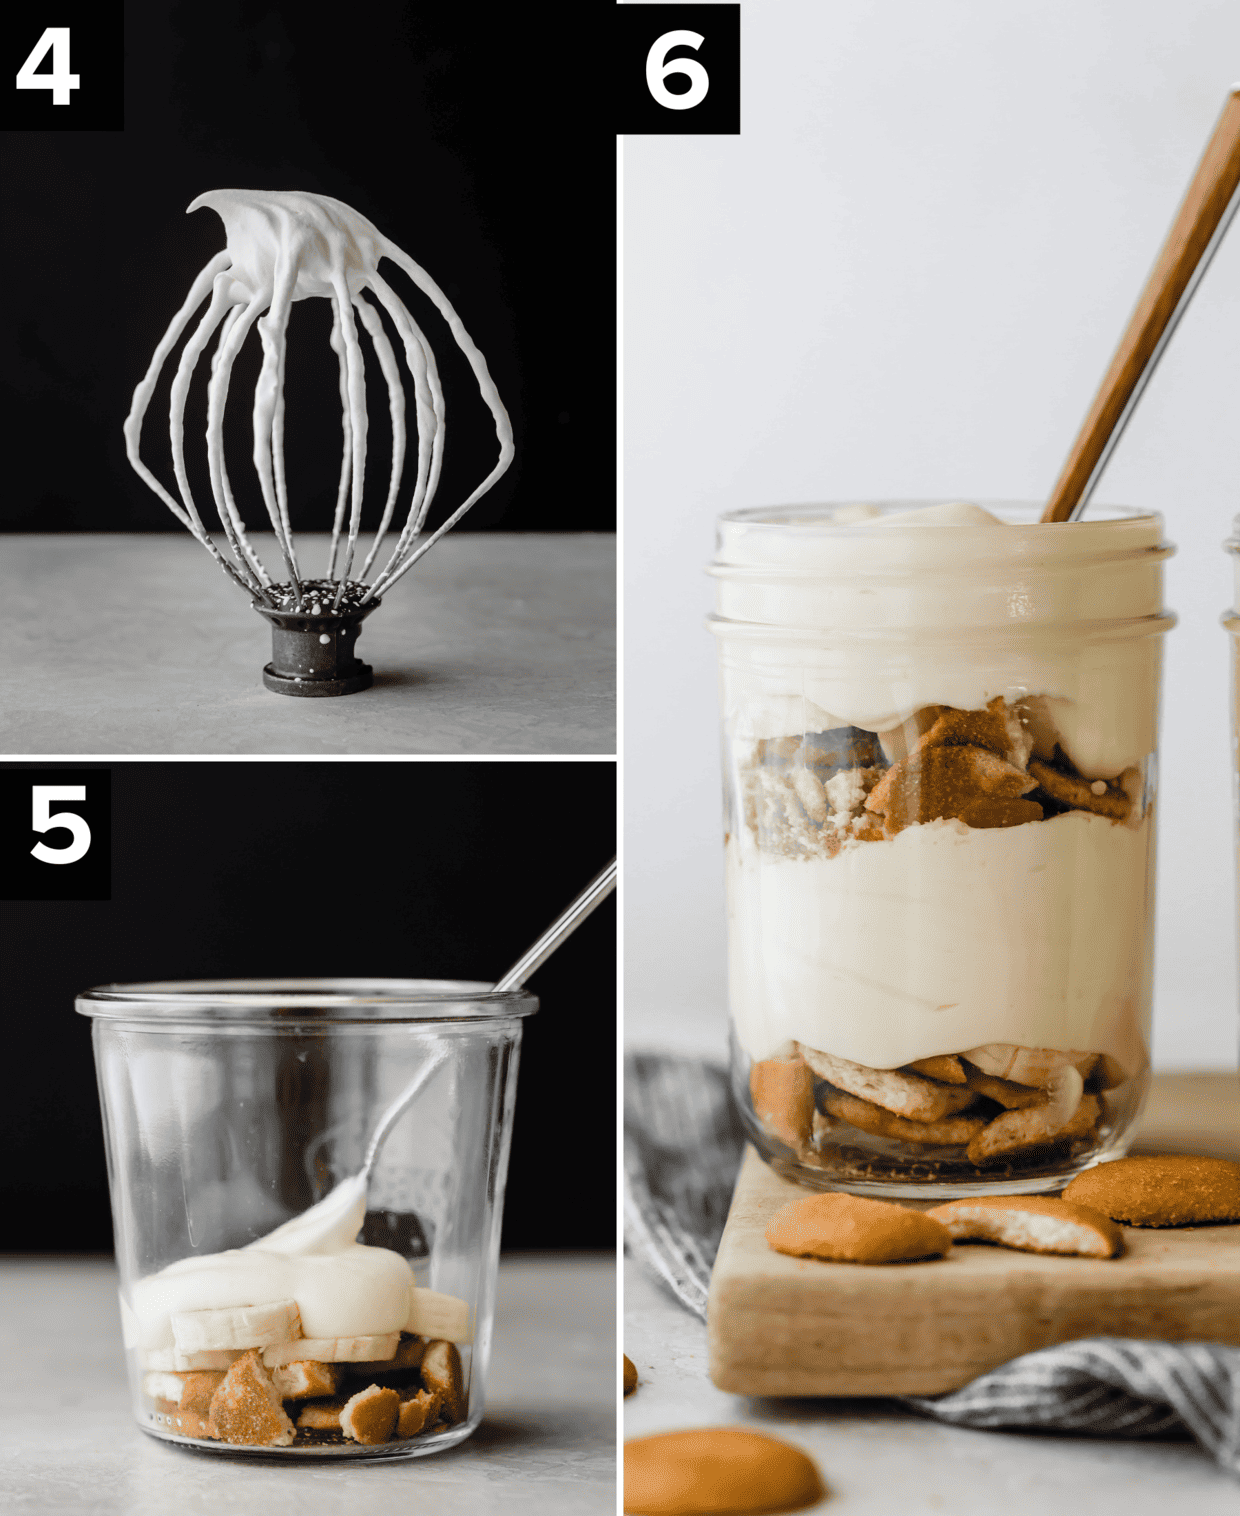 Three images, top left is whipped cream on a whisk, bottom left is Nilla wafers in a jar topped with white pudding, right image is layered Magnolia Bakery Banana Pudding in a jar.